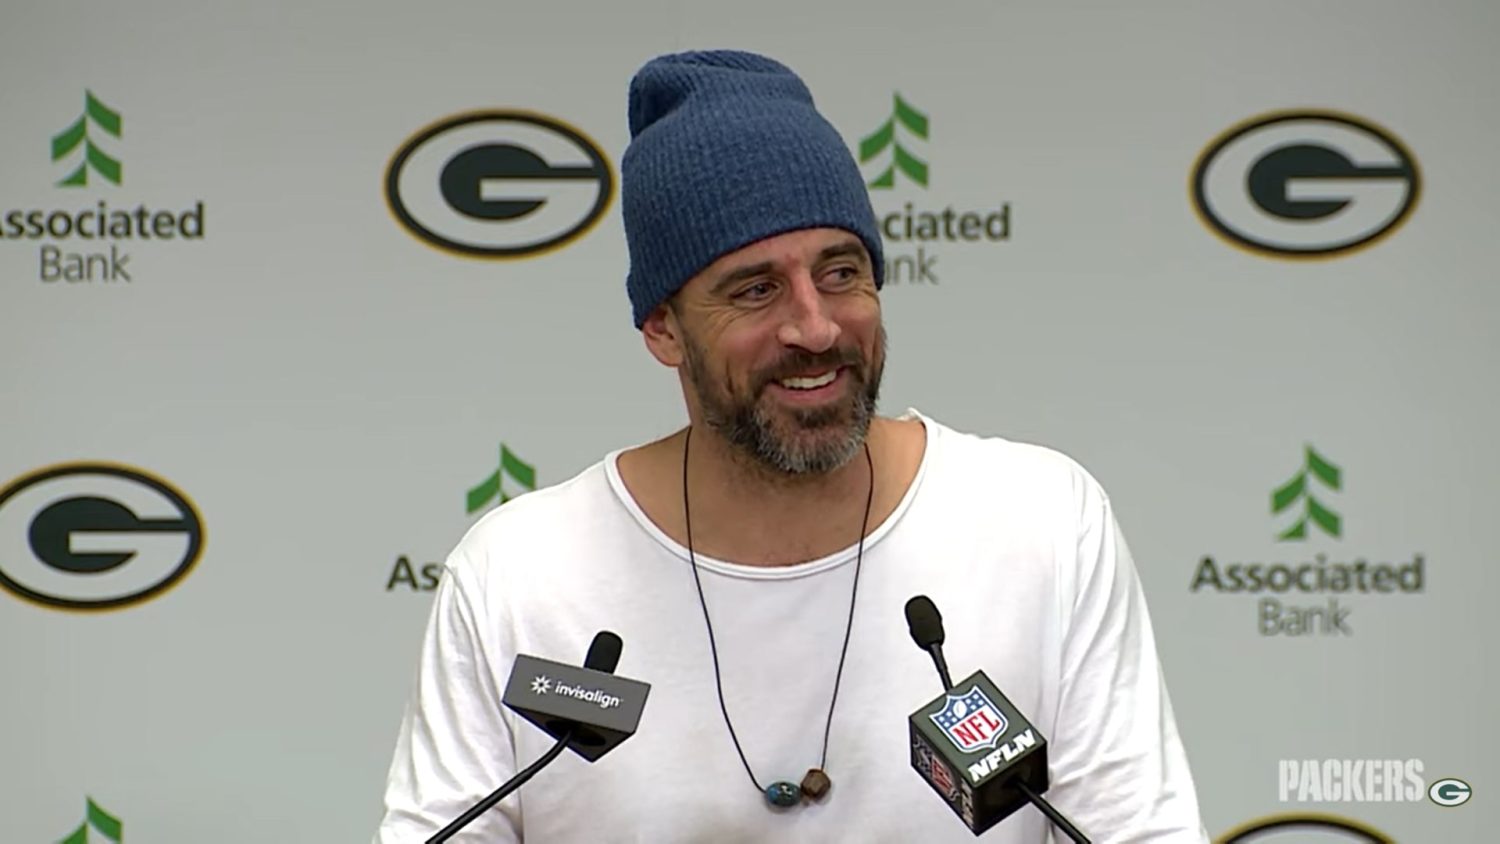 Aaron Rodgers checks out crystals as he waits for Jets trade